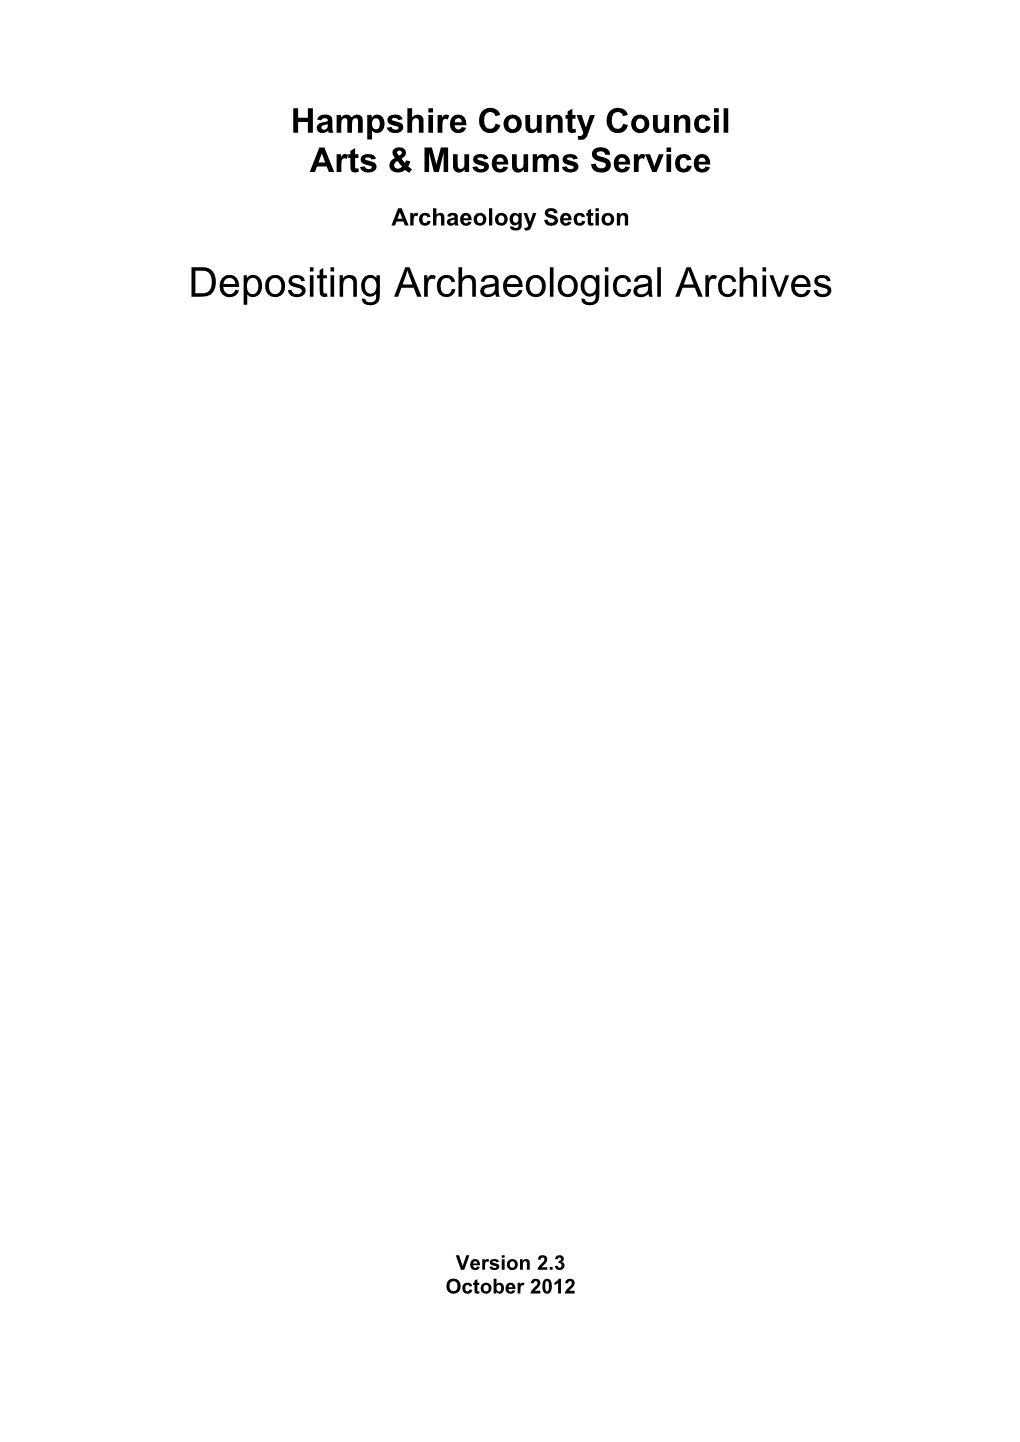 Depositing Archaeological Archives